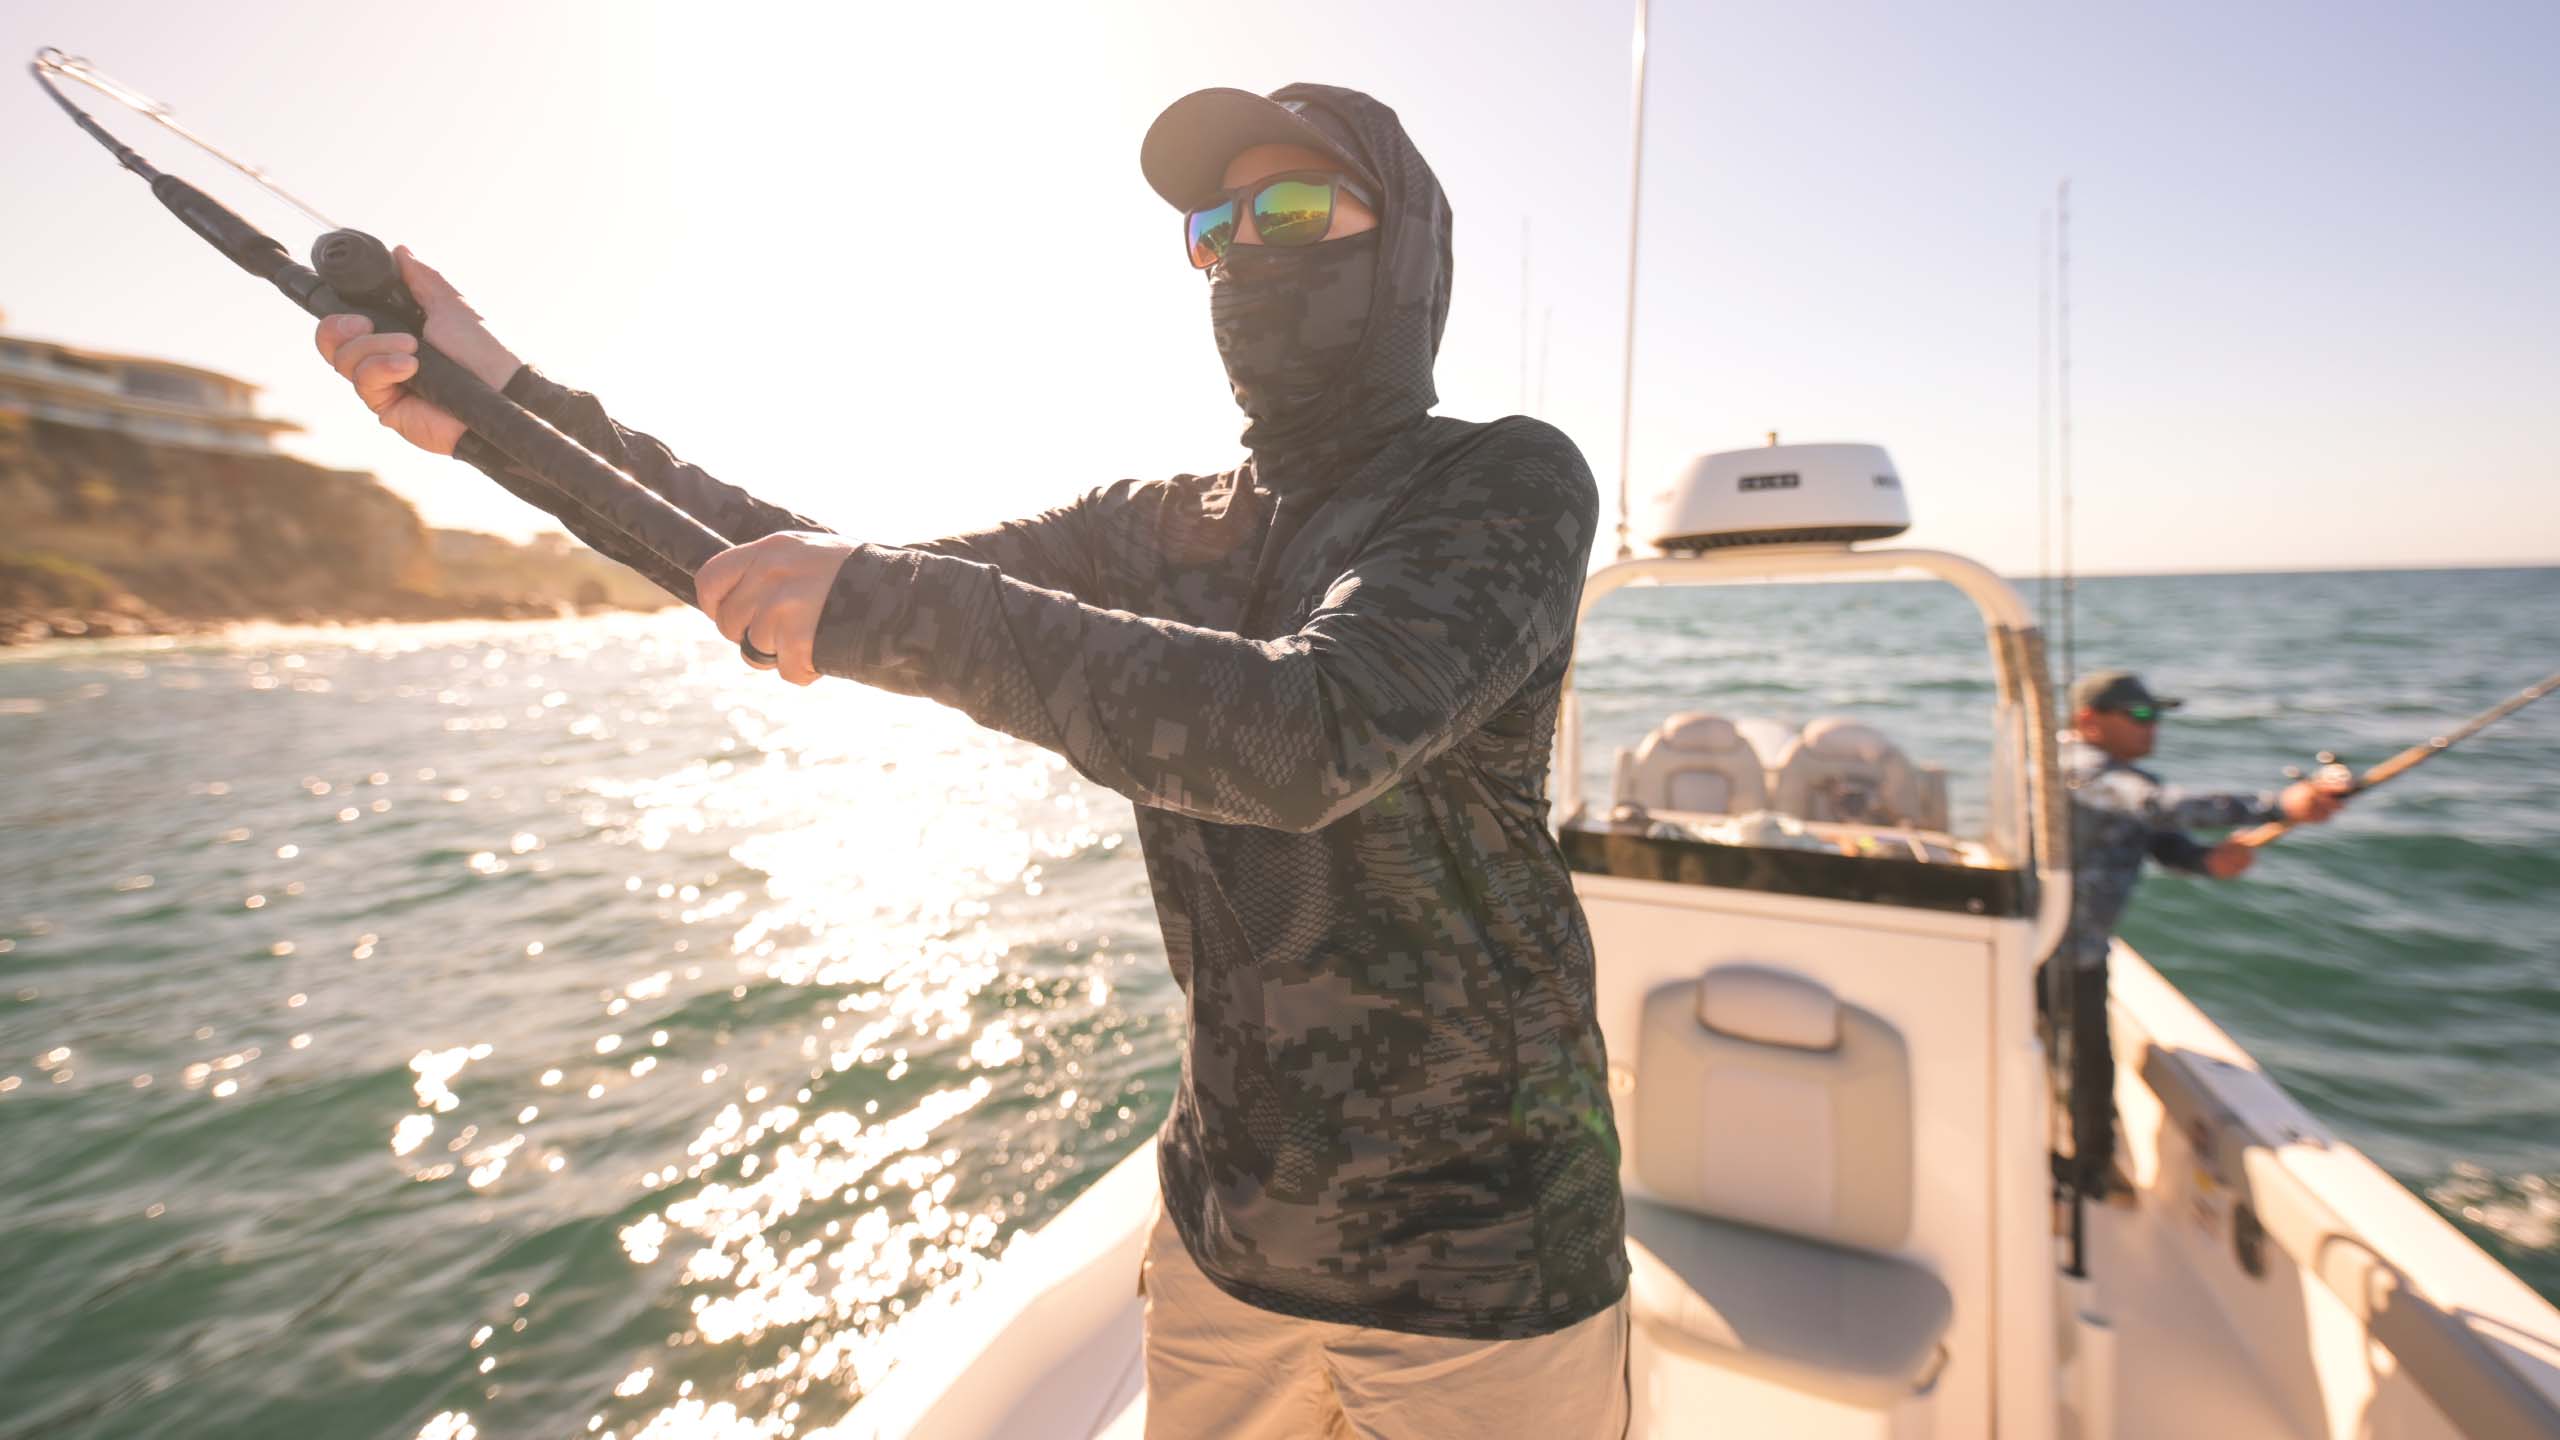 Fishing Shirts for Men -- Comfort & Performance on the Water – The